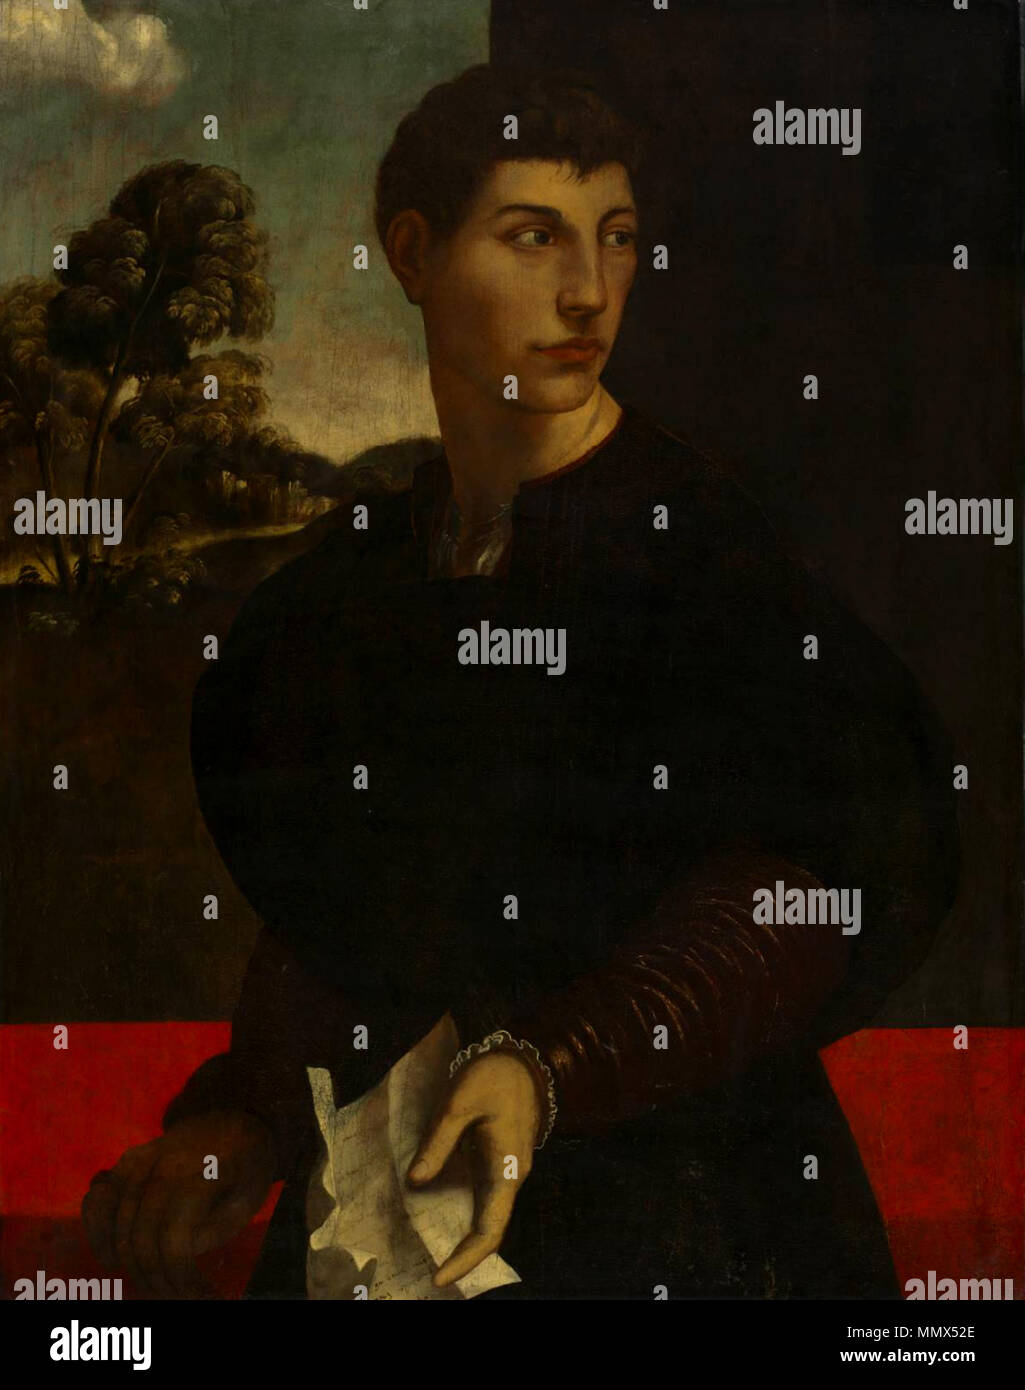 Portrait of a Young Man. circa 1530. Dosso dossi 007 Stock Photo - Alamy